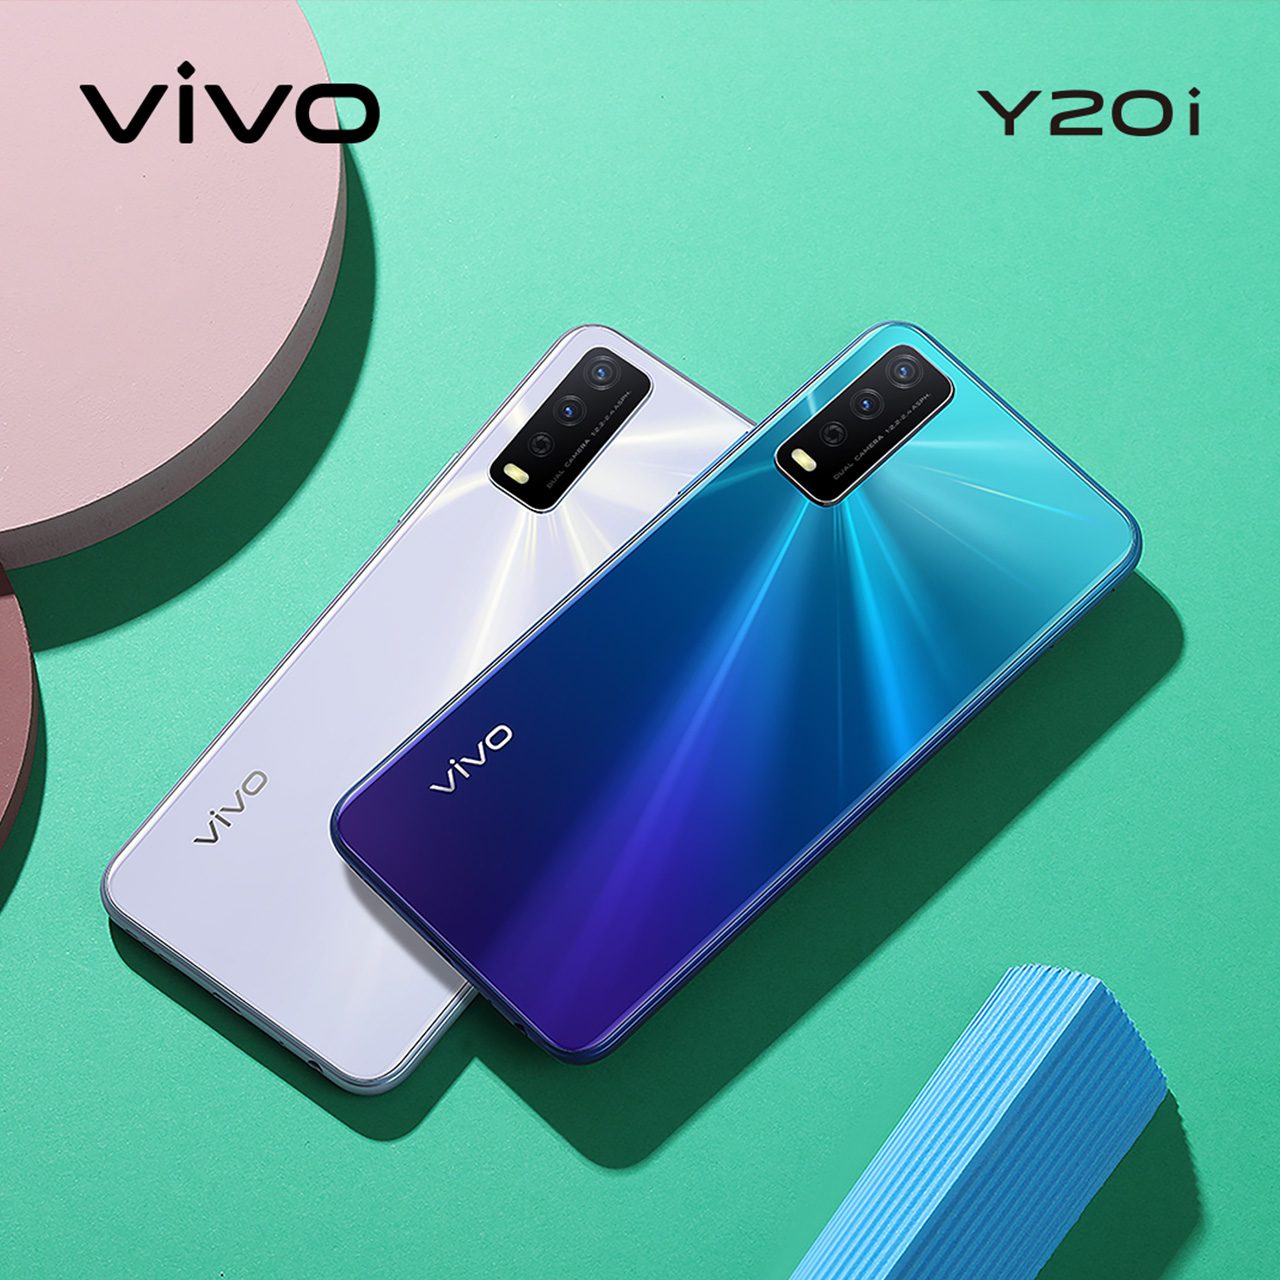 Elevate your style with the new vivo Y20i